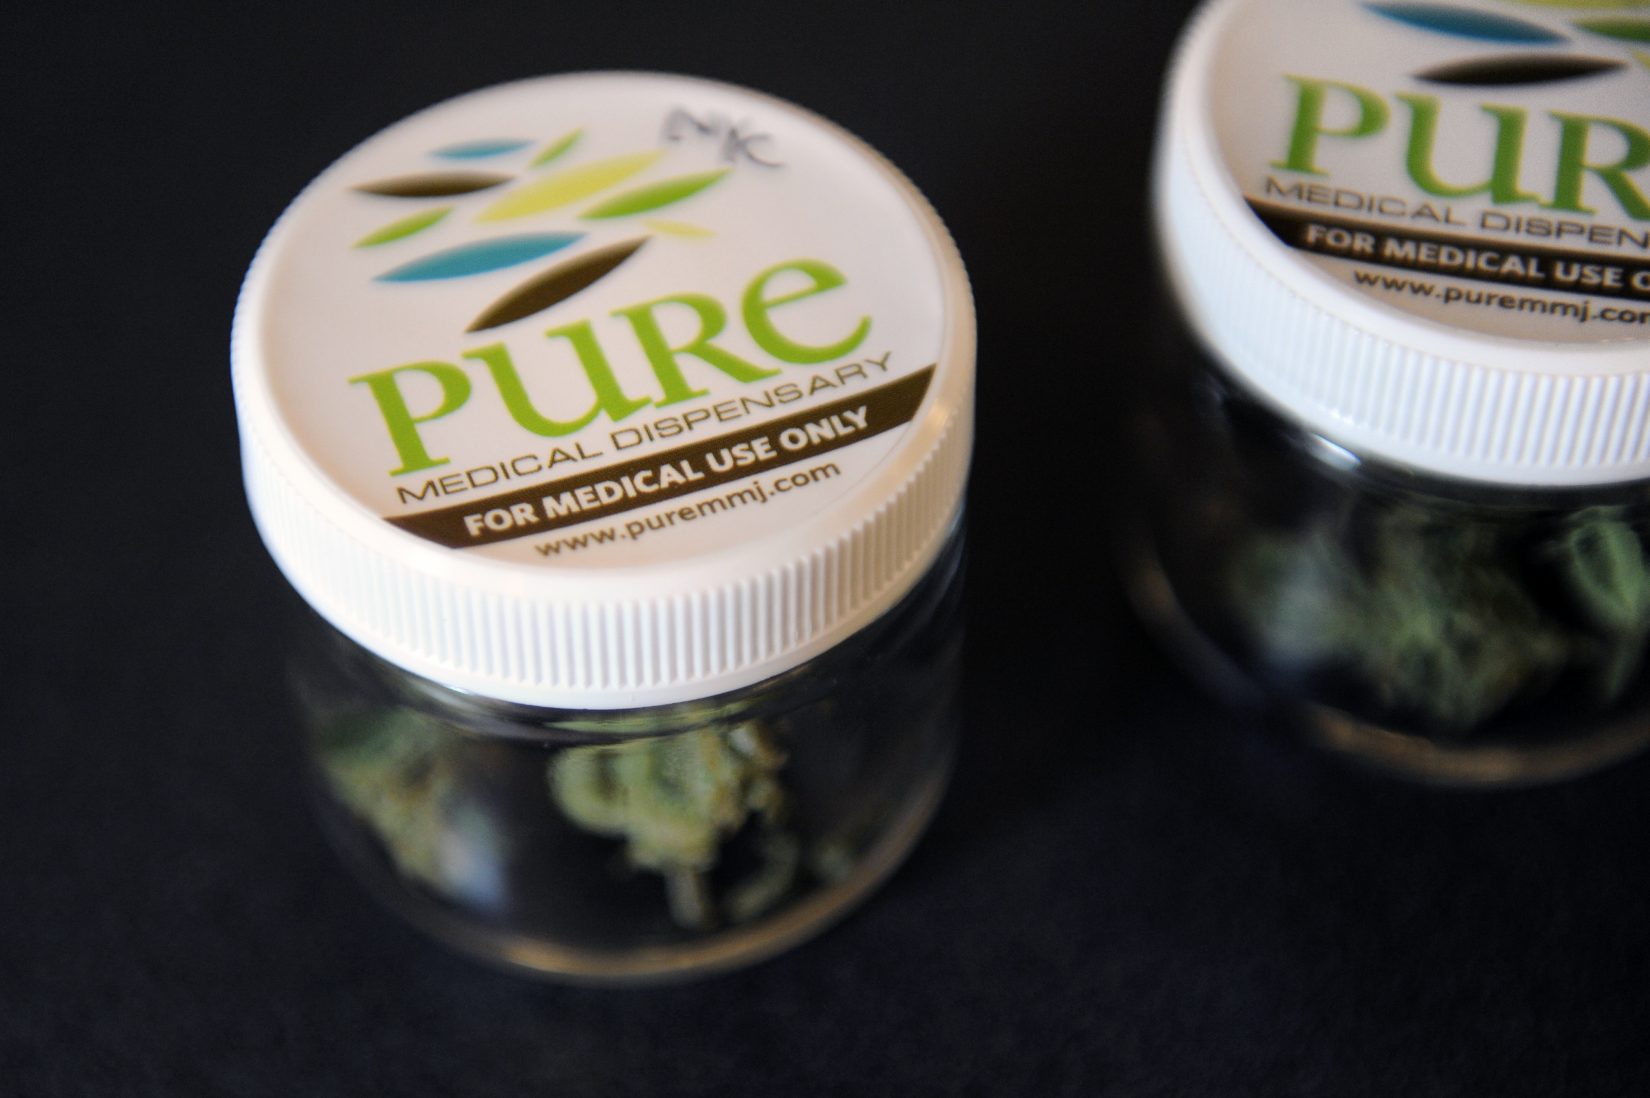 A sampling of the wares of Pure Medical Dispensary (Photo by Joe Amon, The Denver Post)